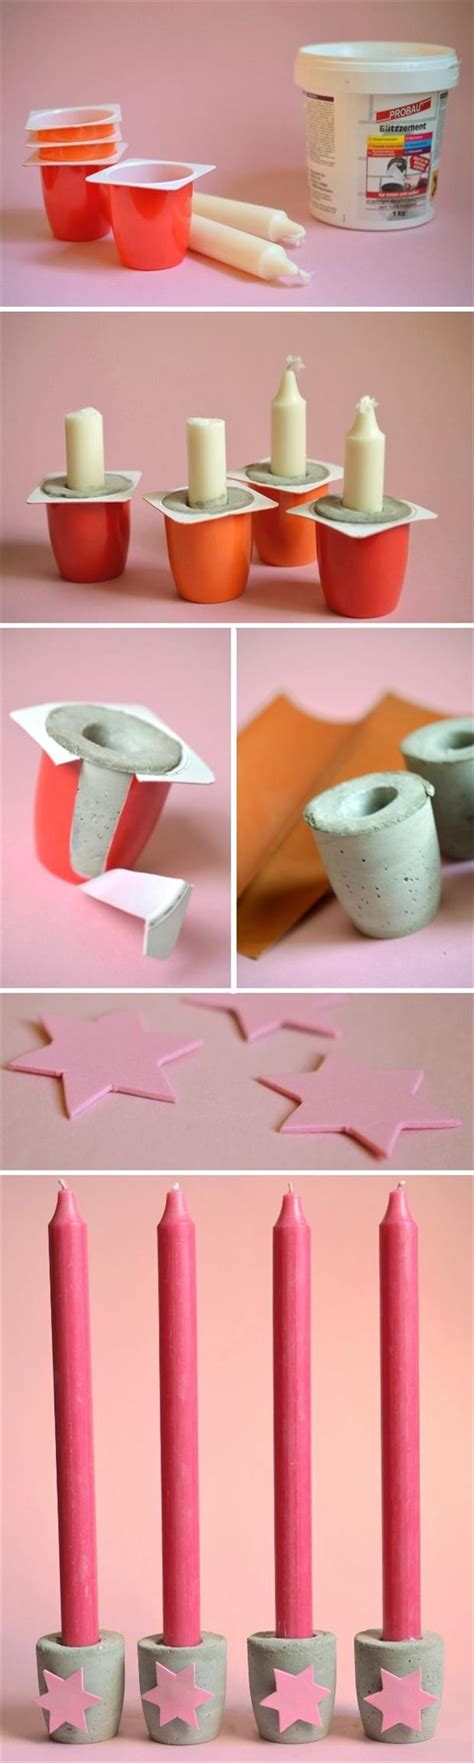 Quick craft ideas that make cool homemade gifts and home decor on a budget. Top 52 DIY Home Projects Gadgets And Ideas